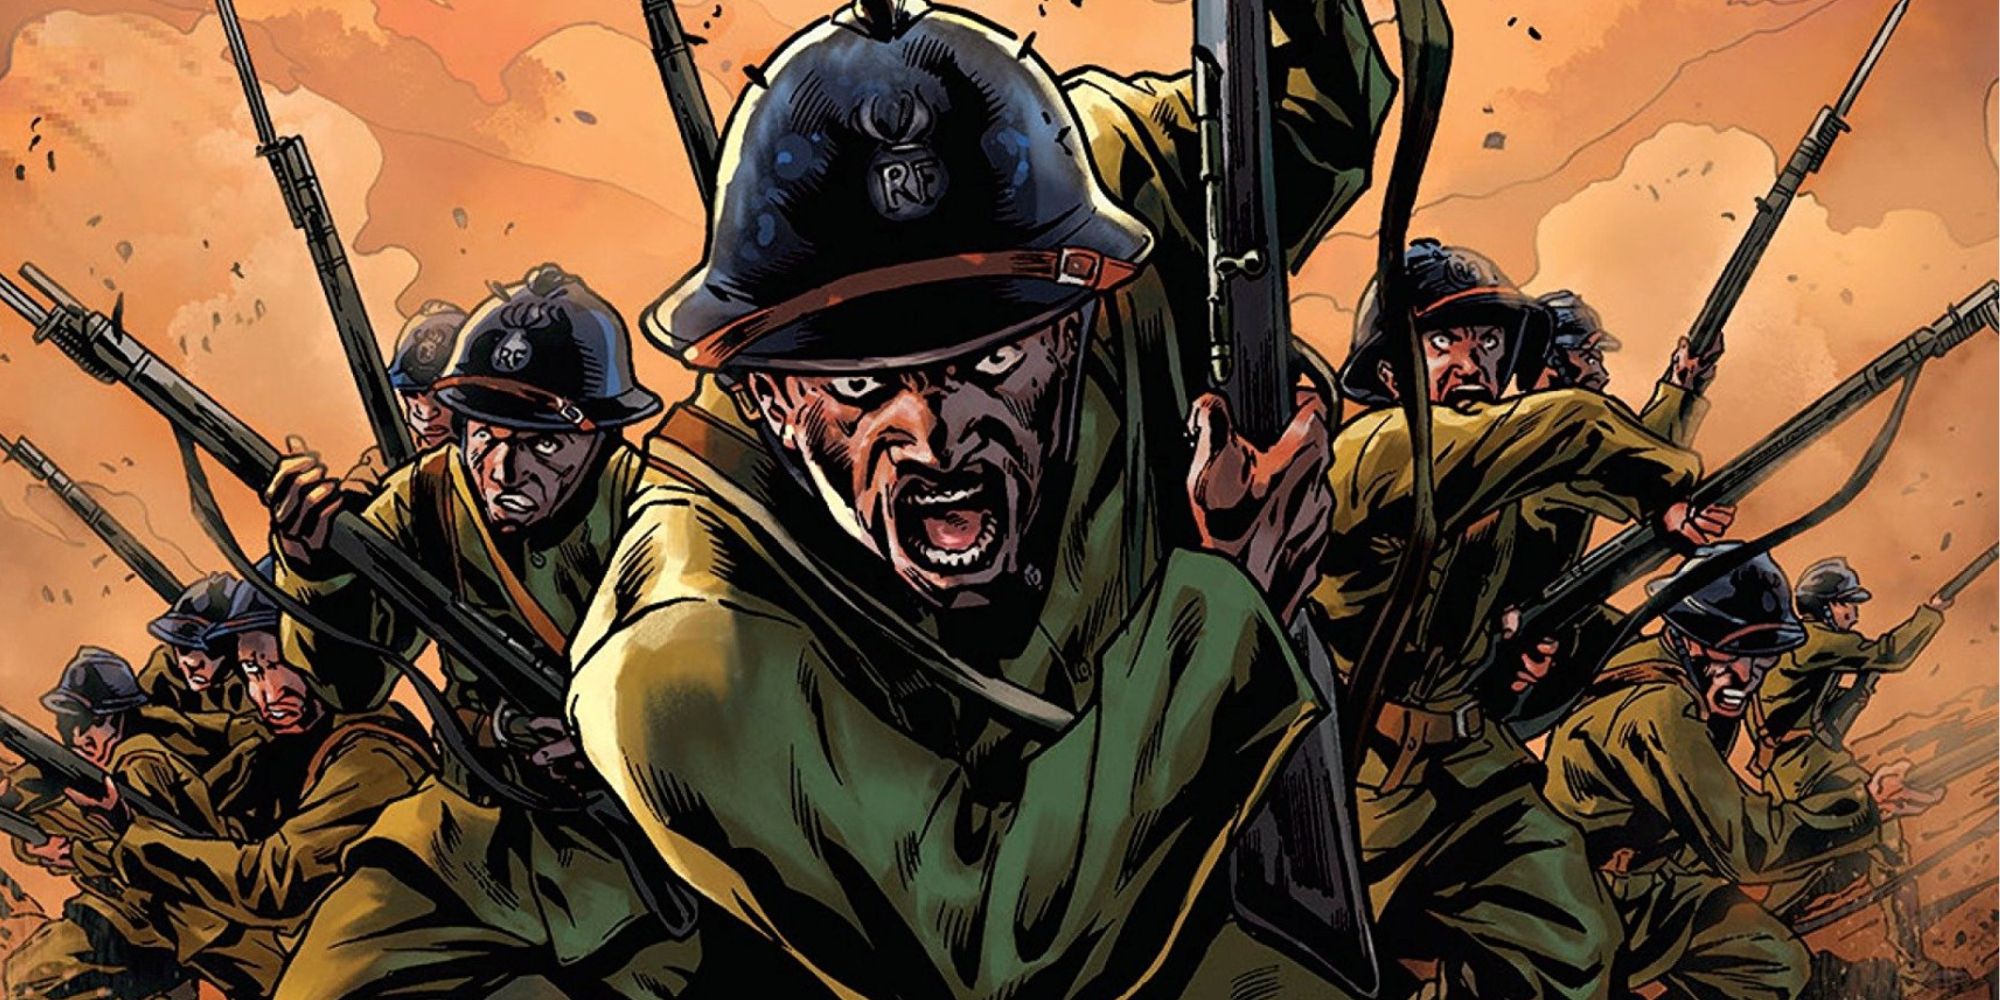 The soldiers known as the Harlem Hellfighters charge into battle